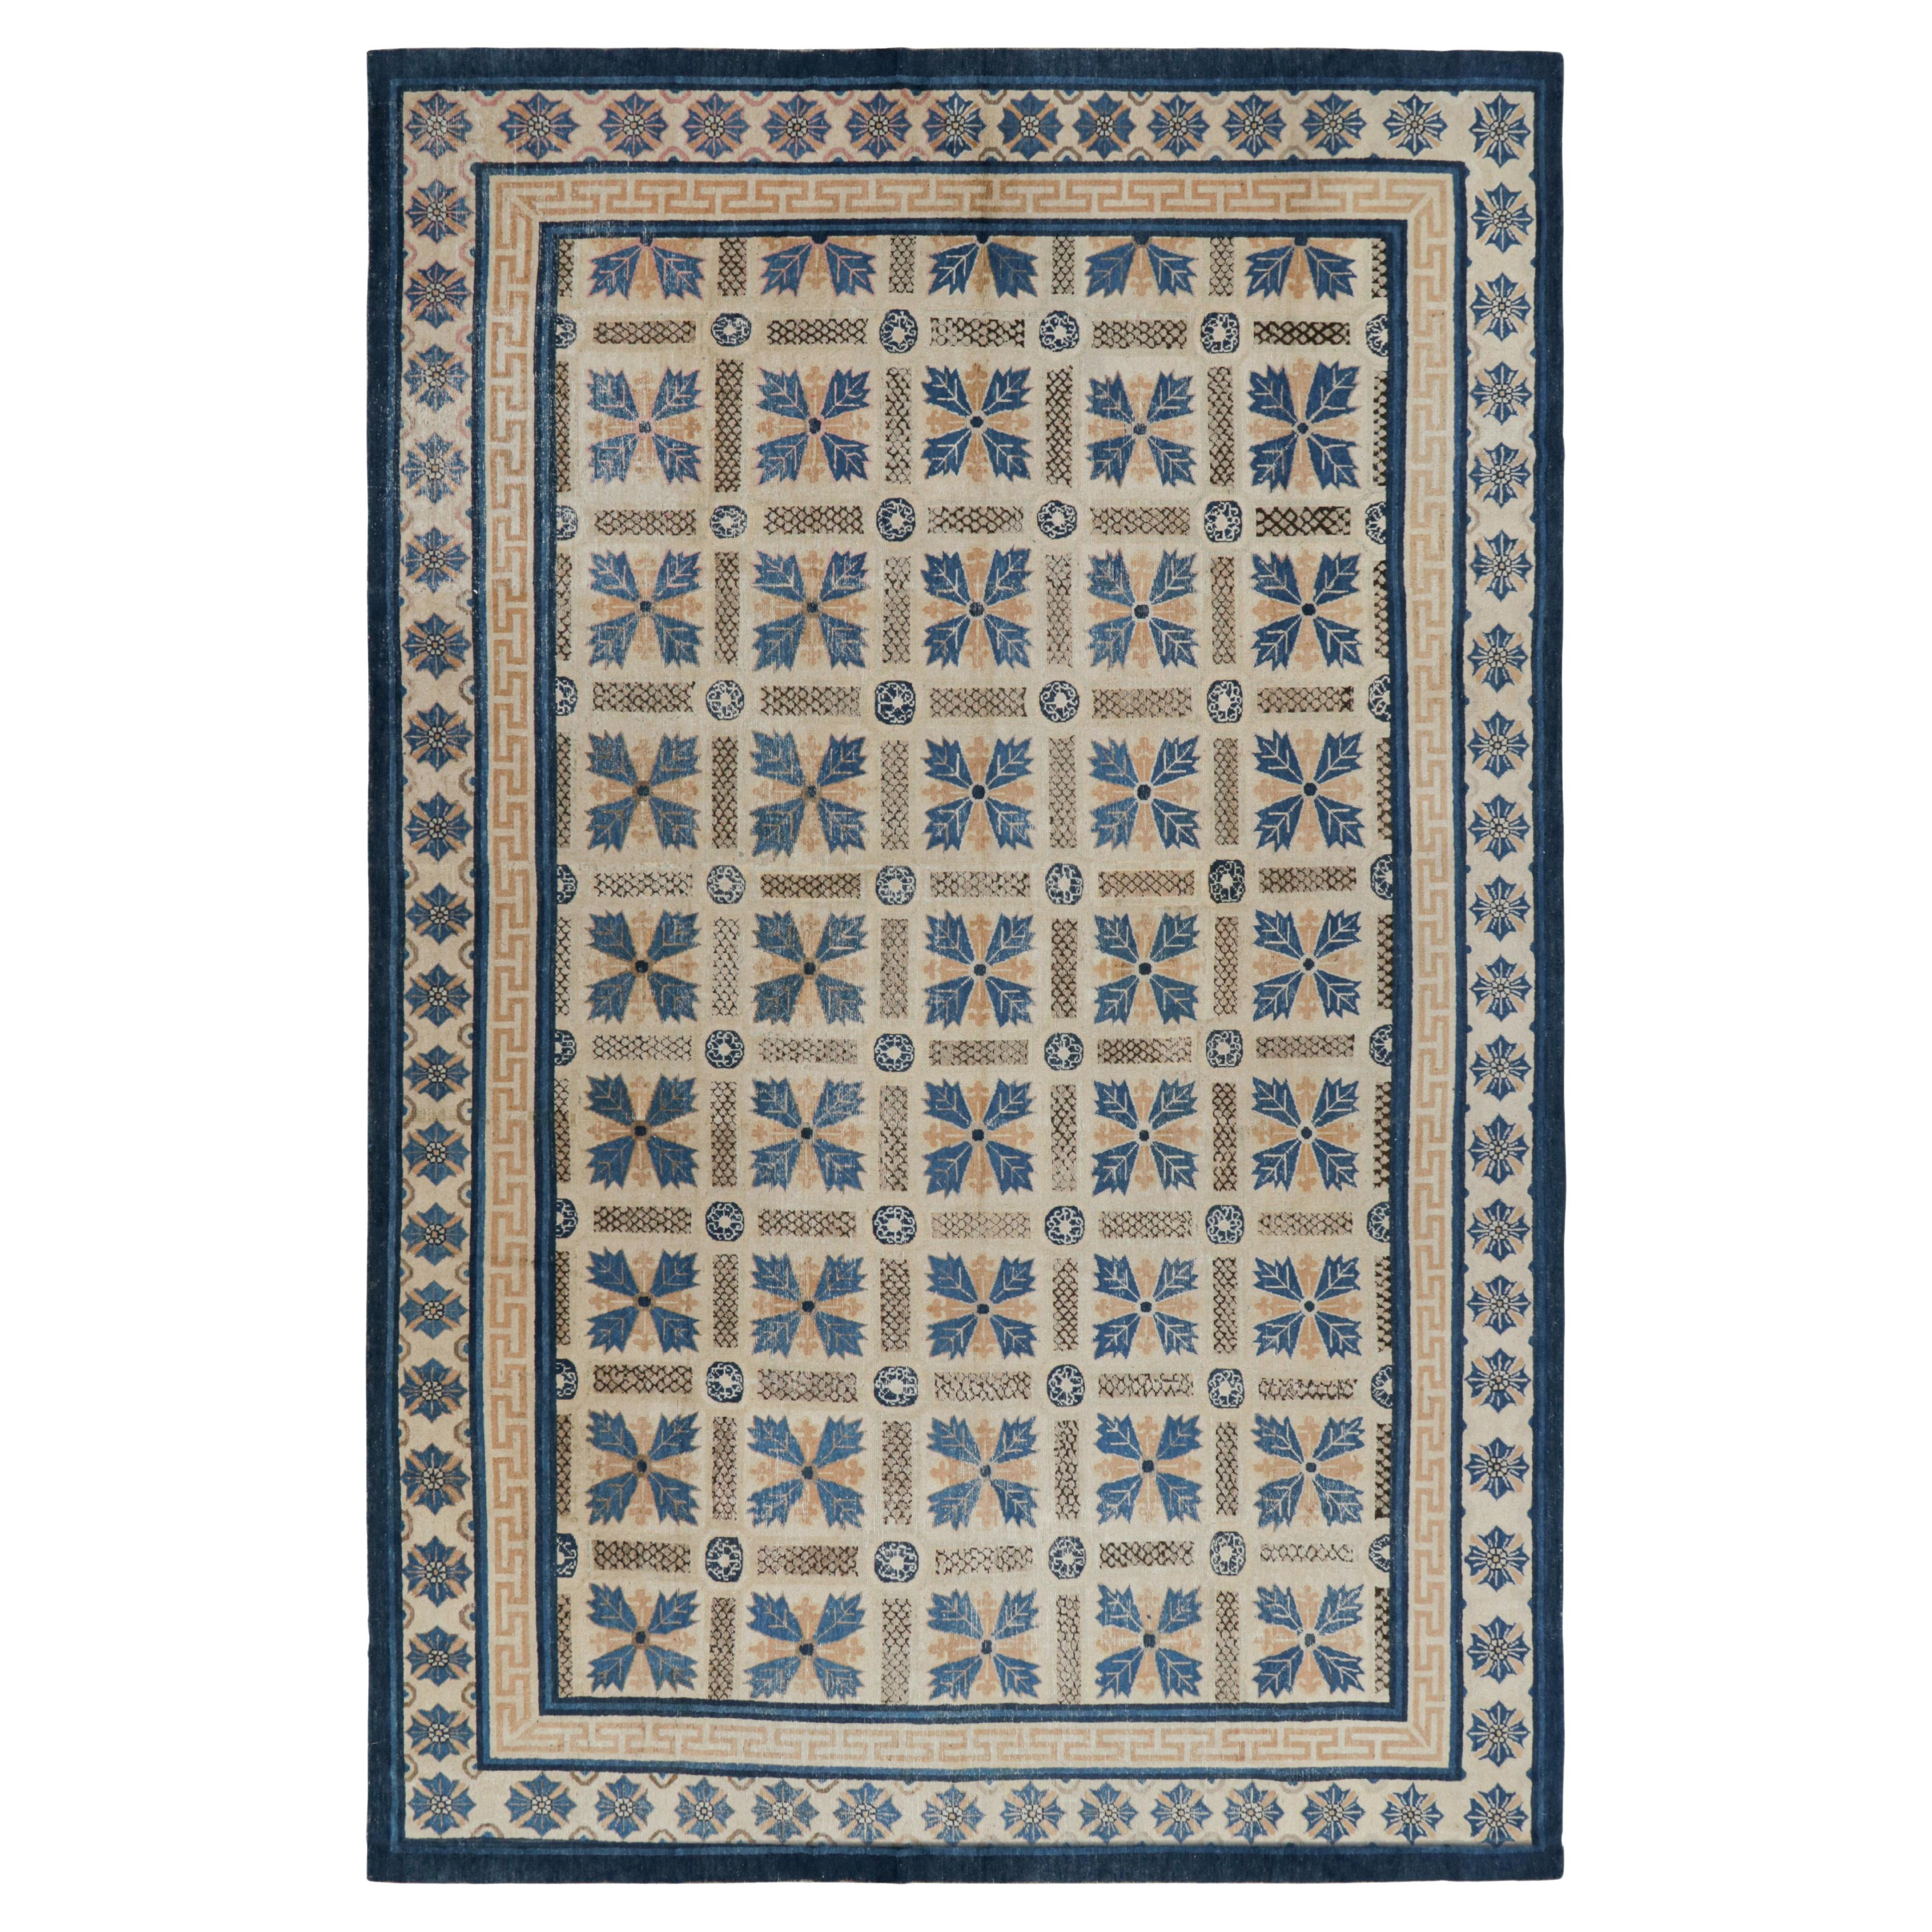 Antique Ningxia Rug in Beige-Brown and Blue Floral Patterns For Sale